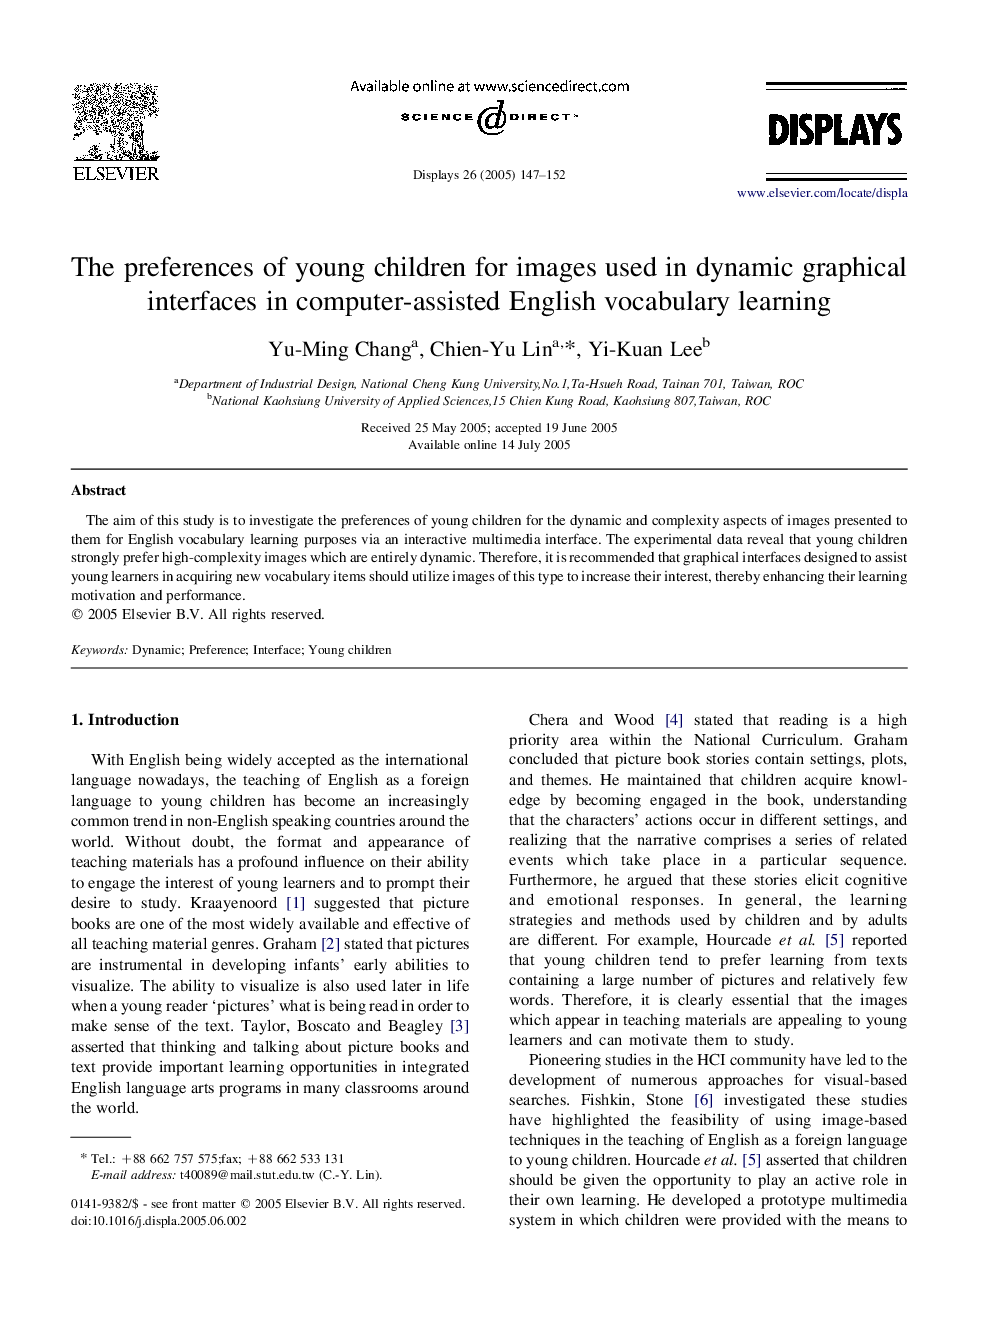 The preferences of young children for images used in dynamic graphical interfaces in computer-assisted English vocabulary learning